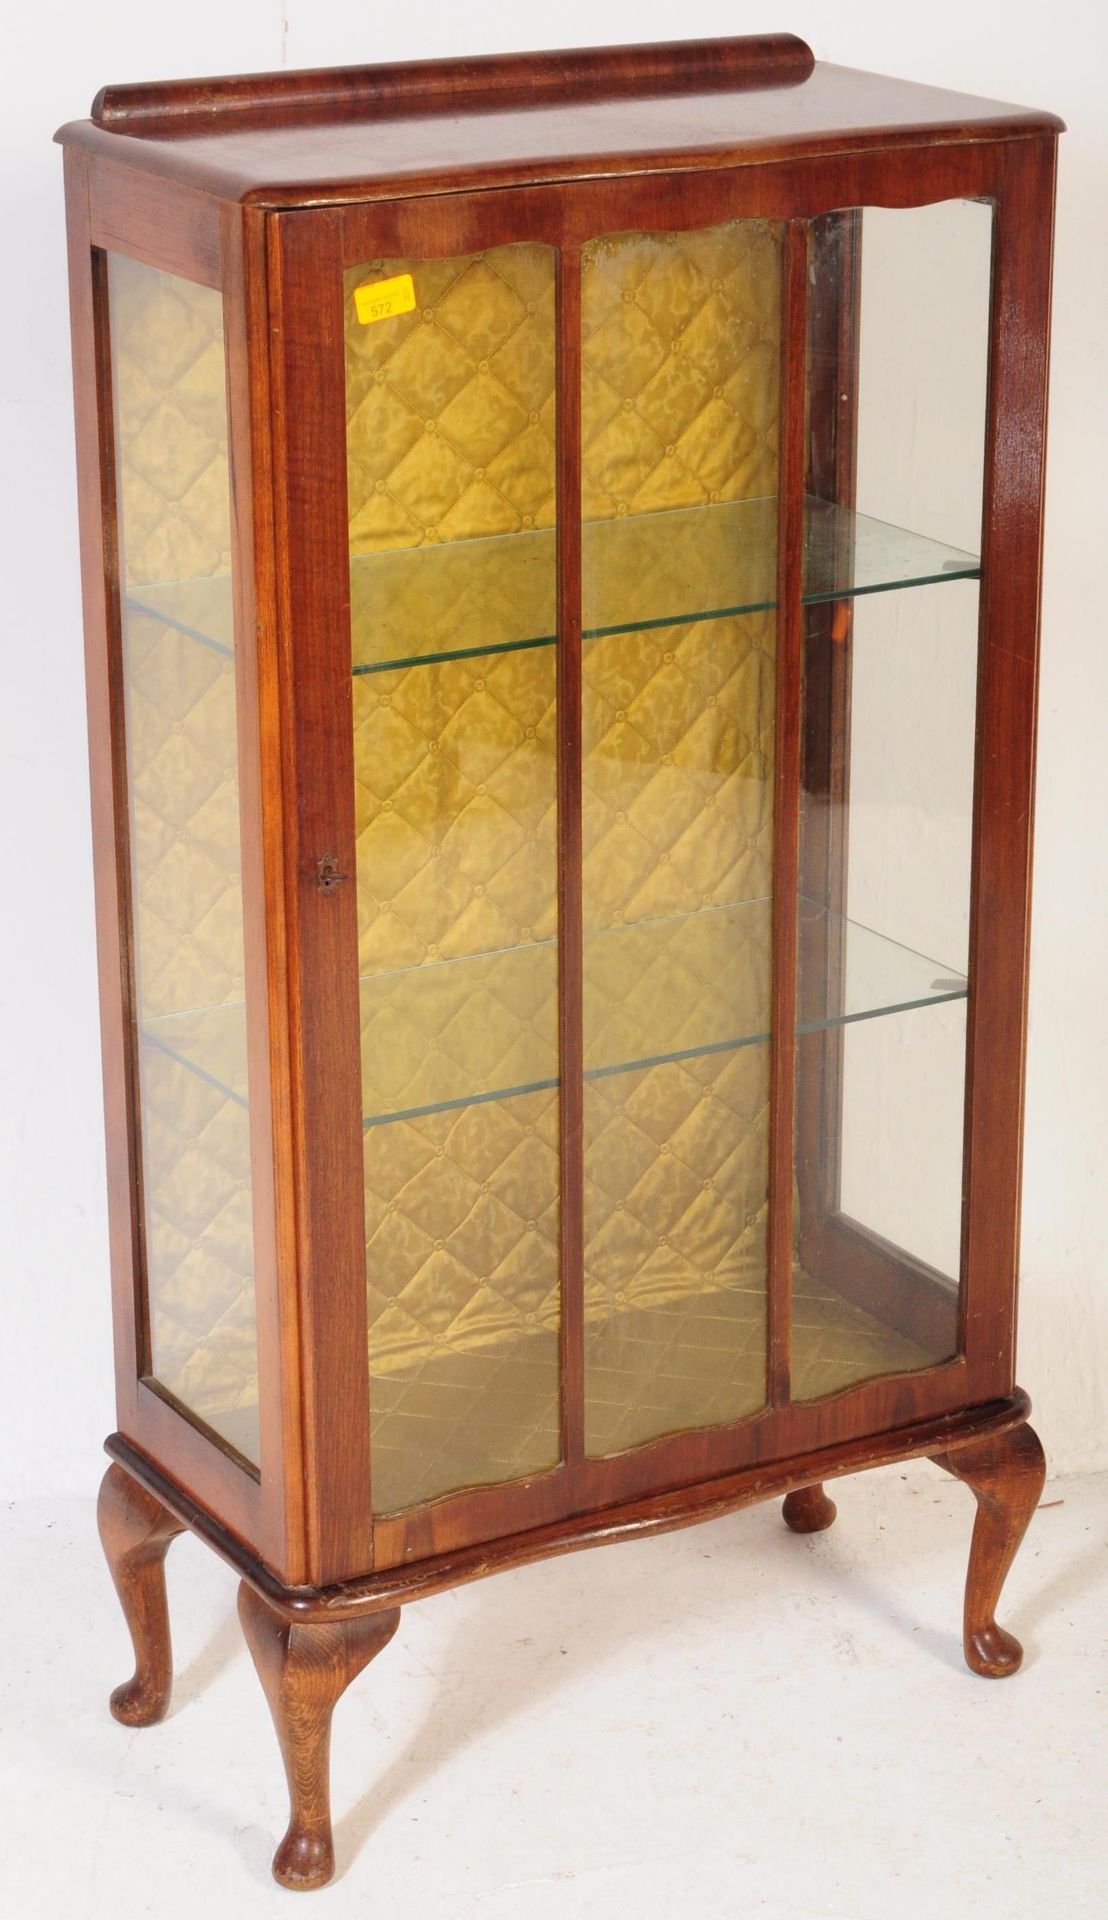 VINTAGE 1940'S QUEEN ANNE REVIVAL DISPLAY CABINET - Image 2 of 4